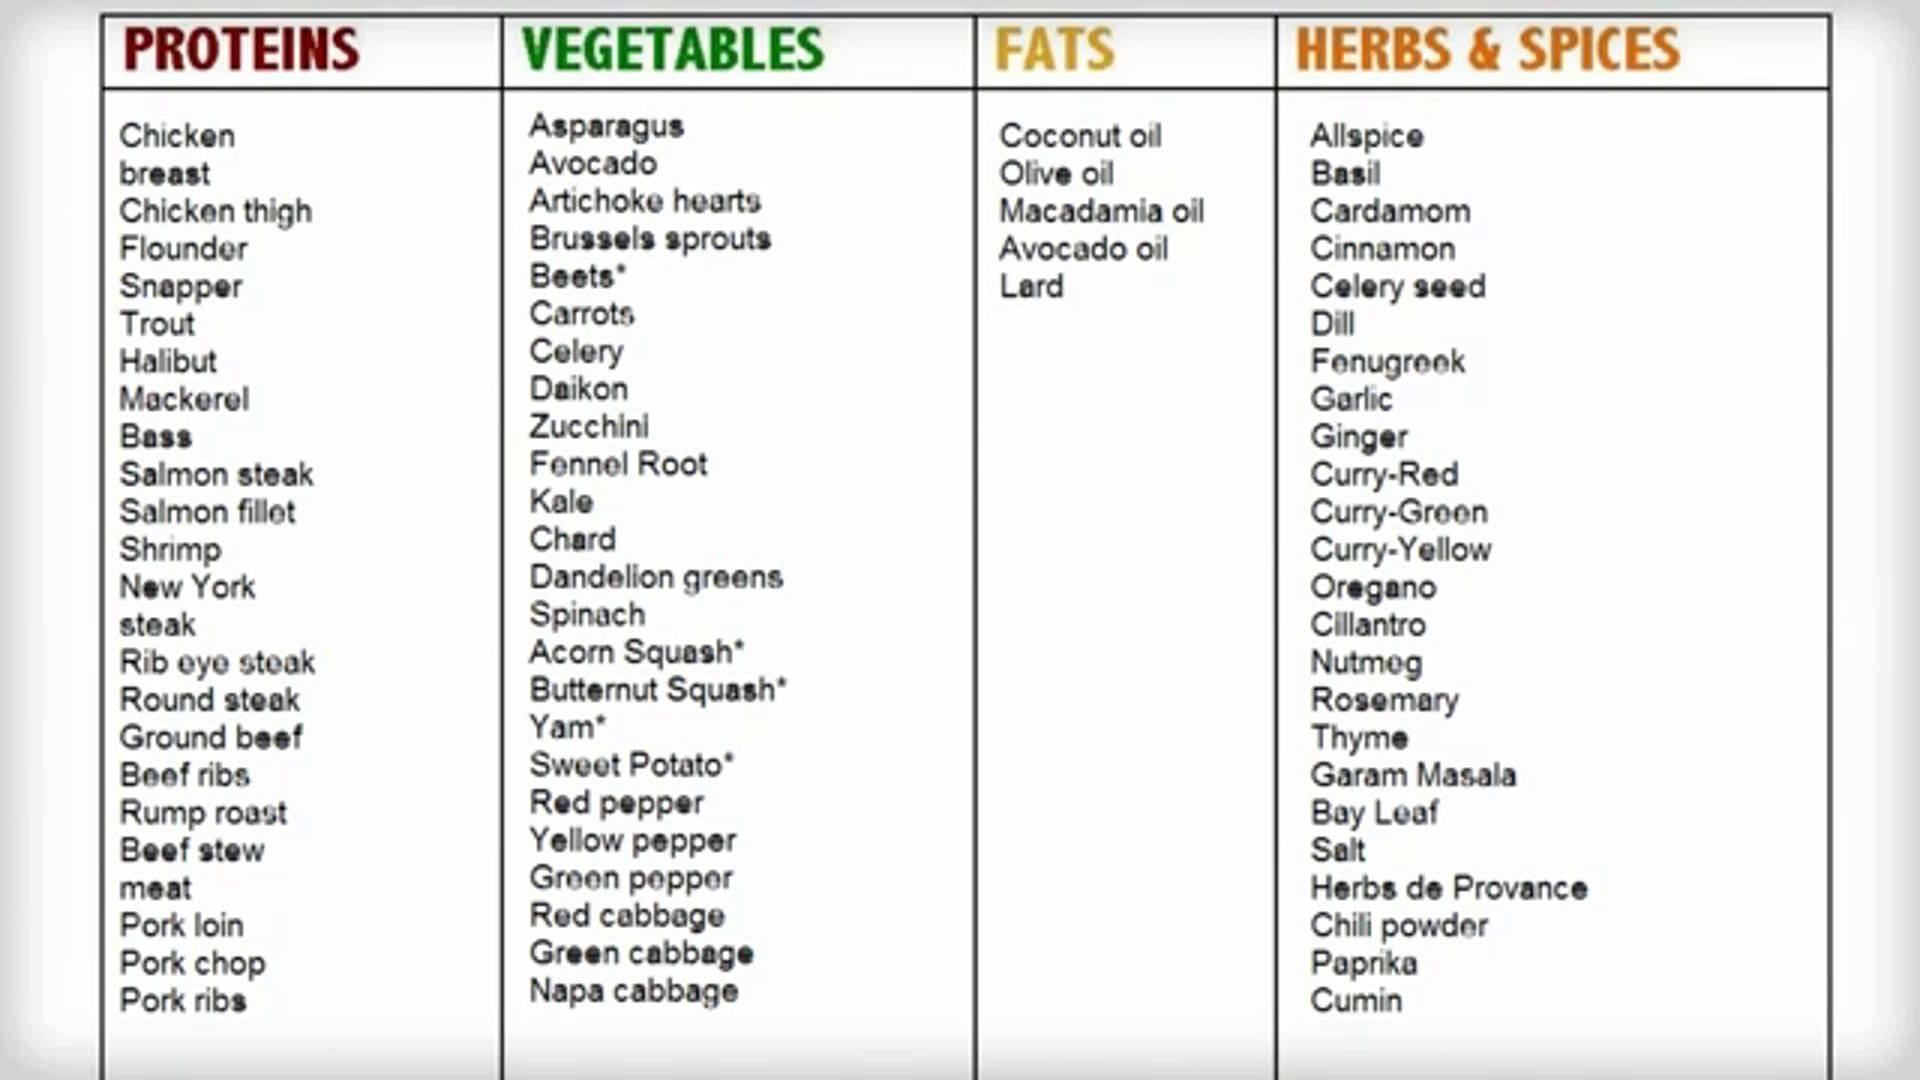 Paleo Diet Food List – Ultimate Food and Grocery List for the Paleo Diet